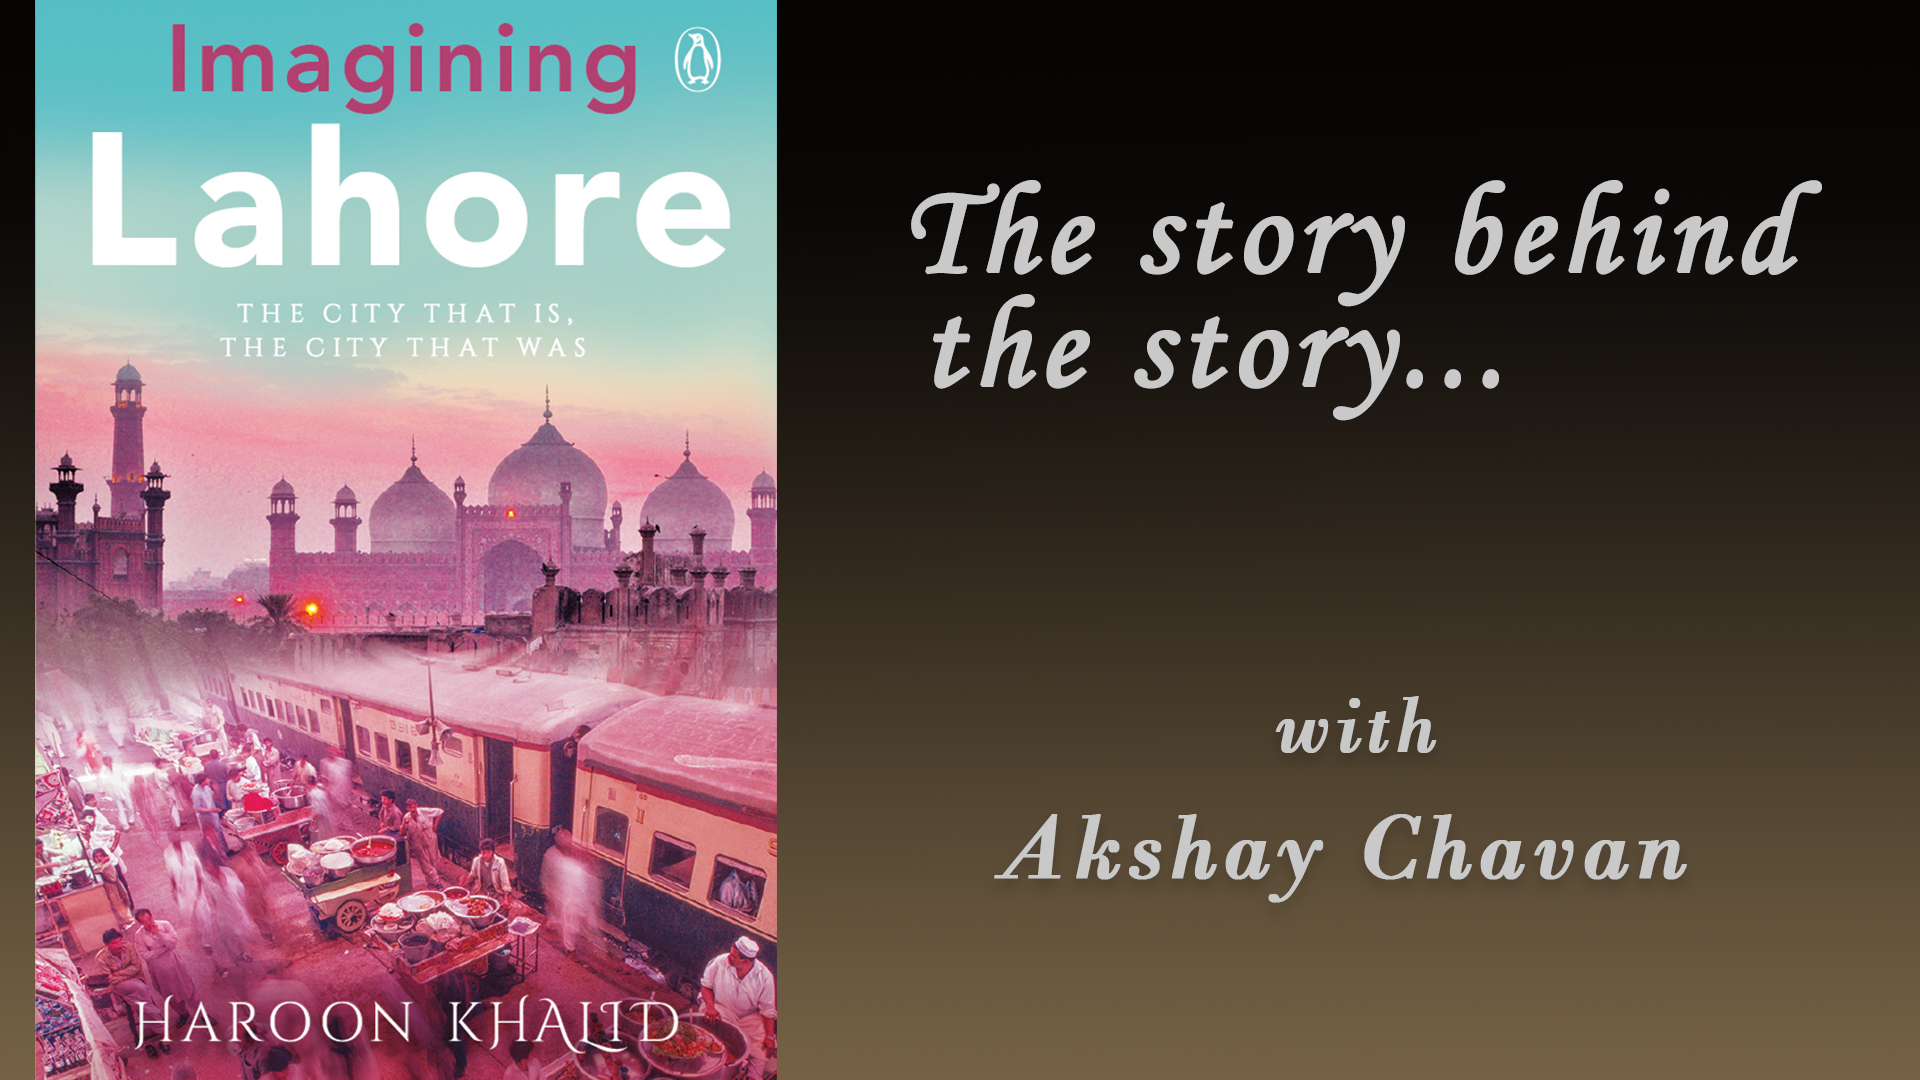 The story behind the story of ‘Imagining Lahore’